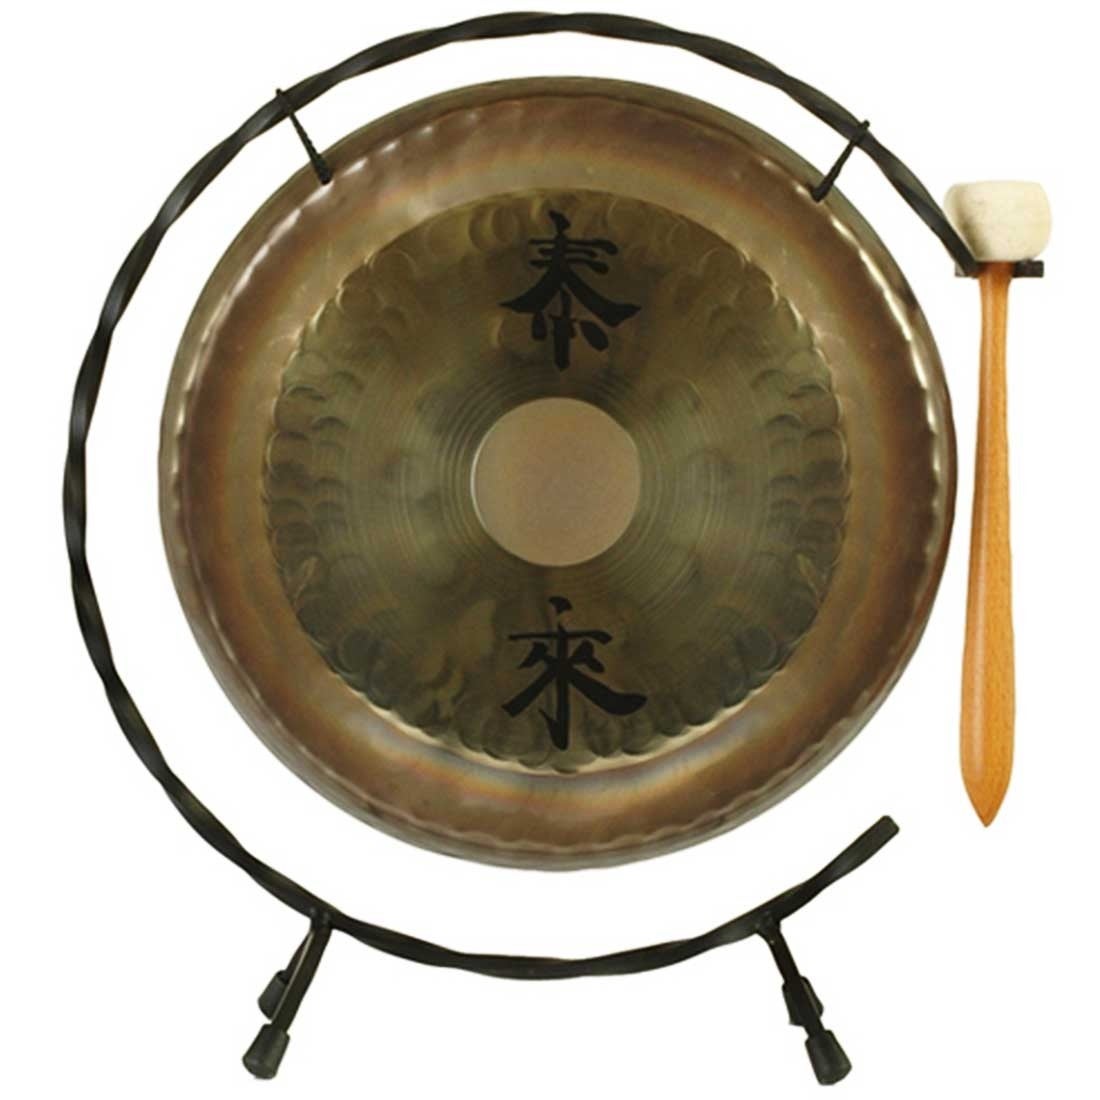 https://www.musicworks.co.nz/content/products/paiste-223305307-7-inch-deco-gong-with-stand-1-pa223305307.jpg?canvas=1:1&width=2500